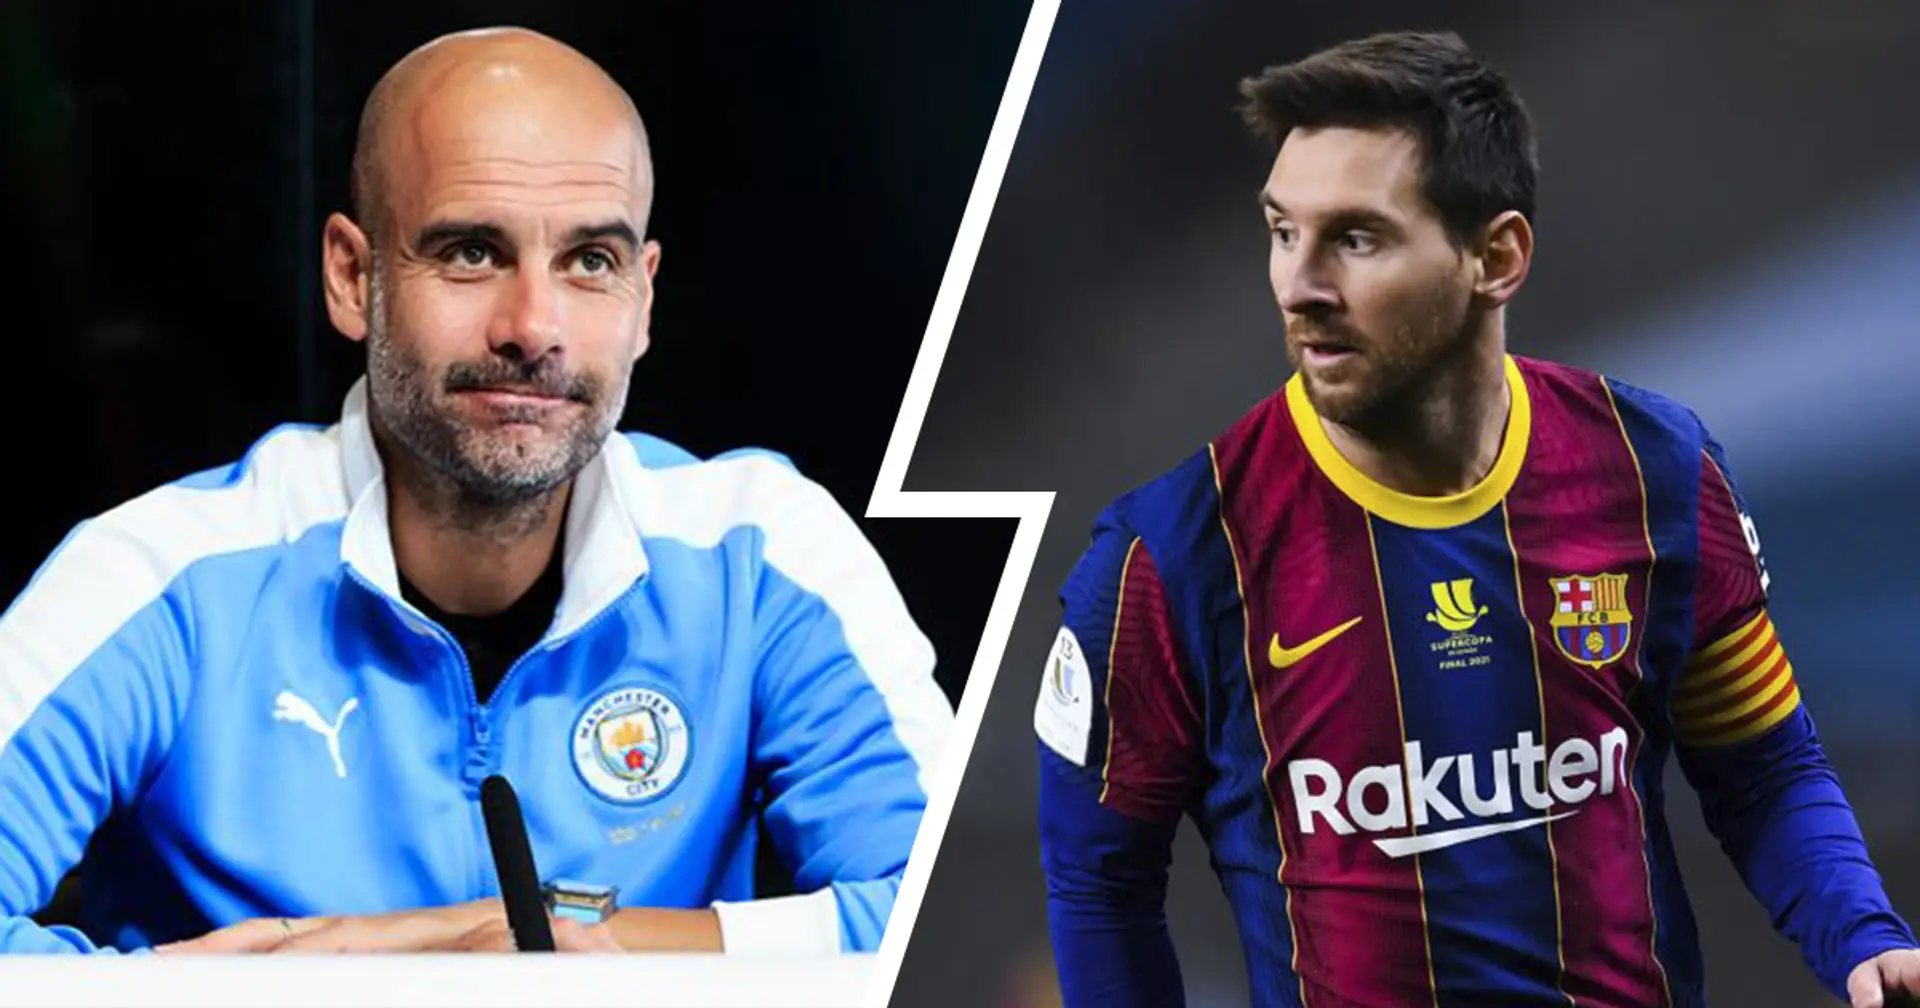 Man City to make Messi offer worth £433m and 2-year deal with New York City in summer (reliability: 3 stars)